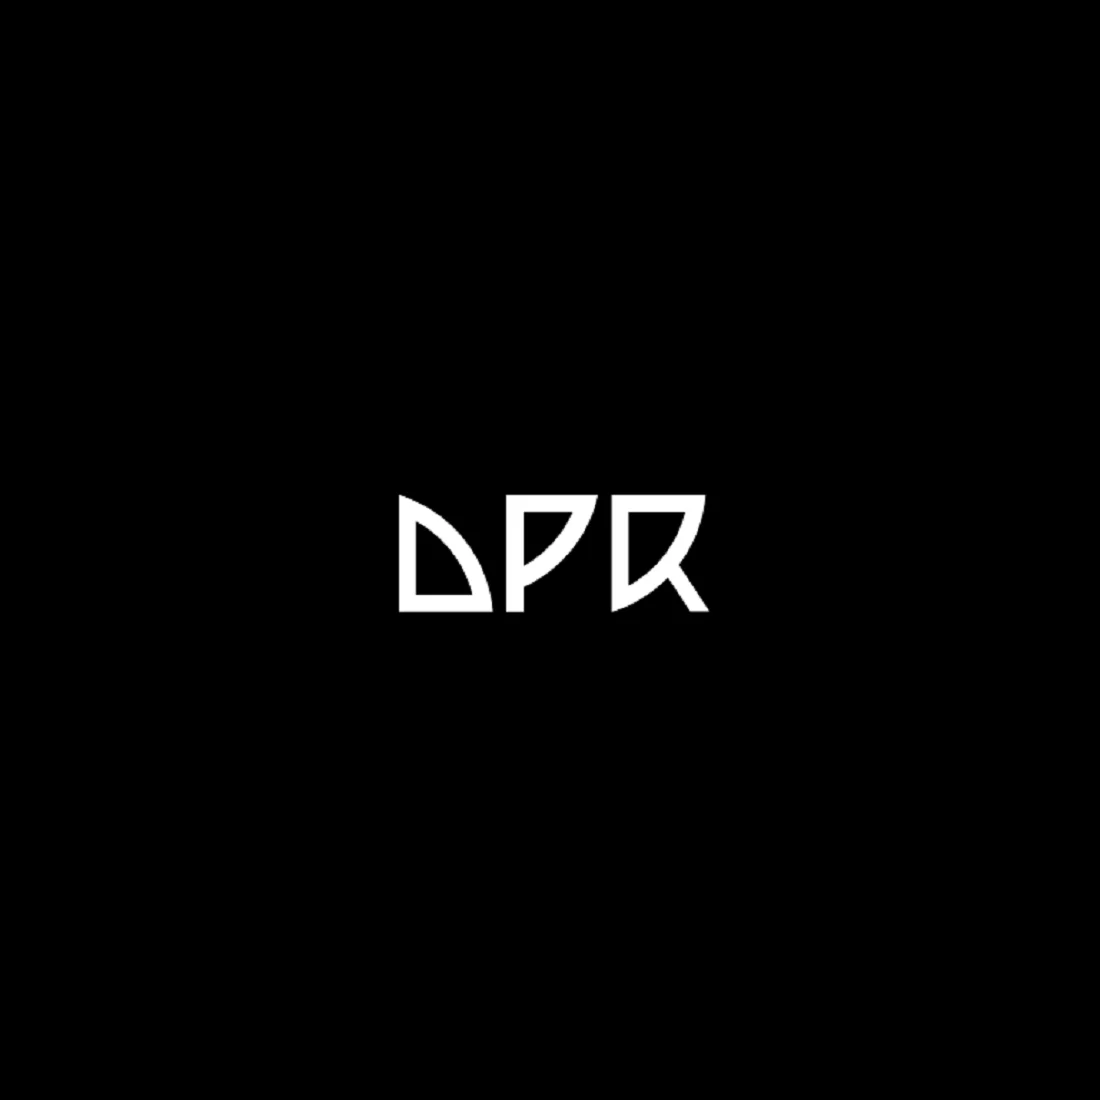 DPR IAN Discography (Updated!) - Kpop Profiles